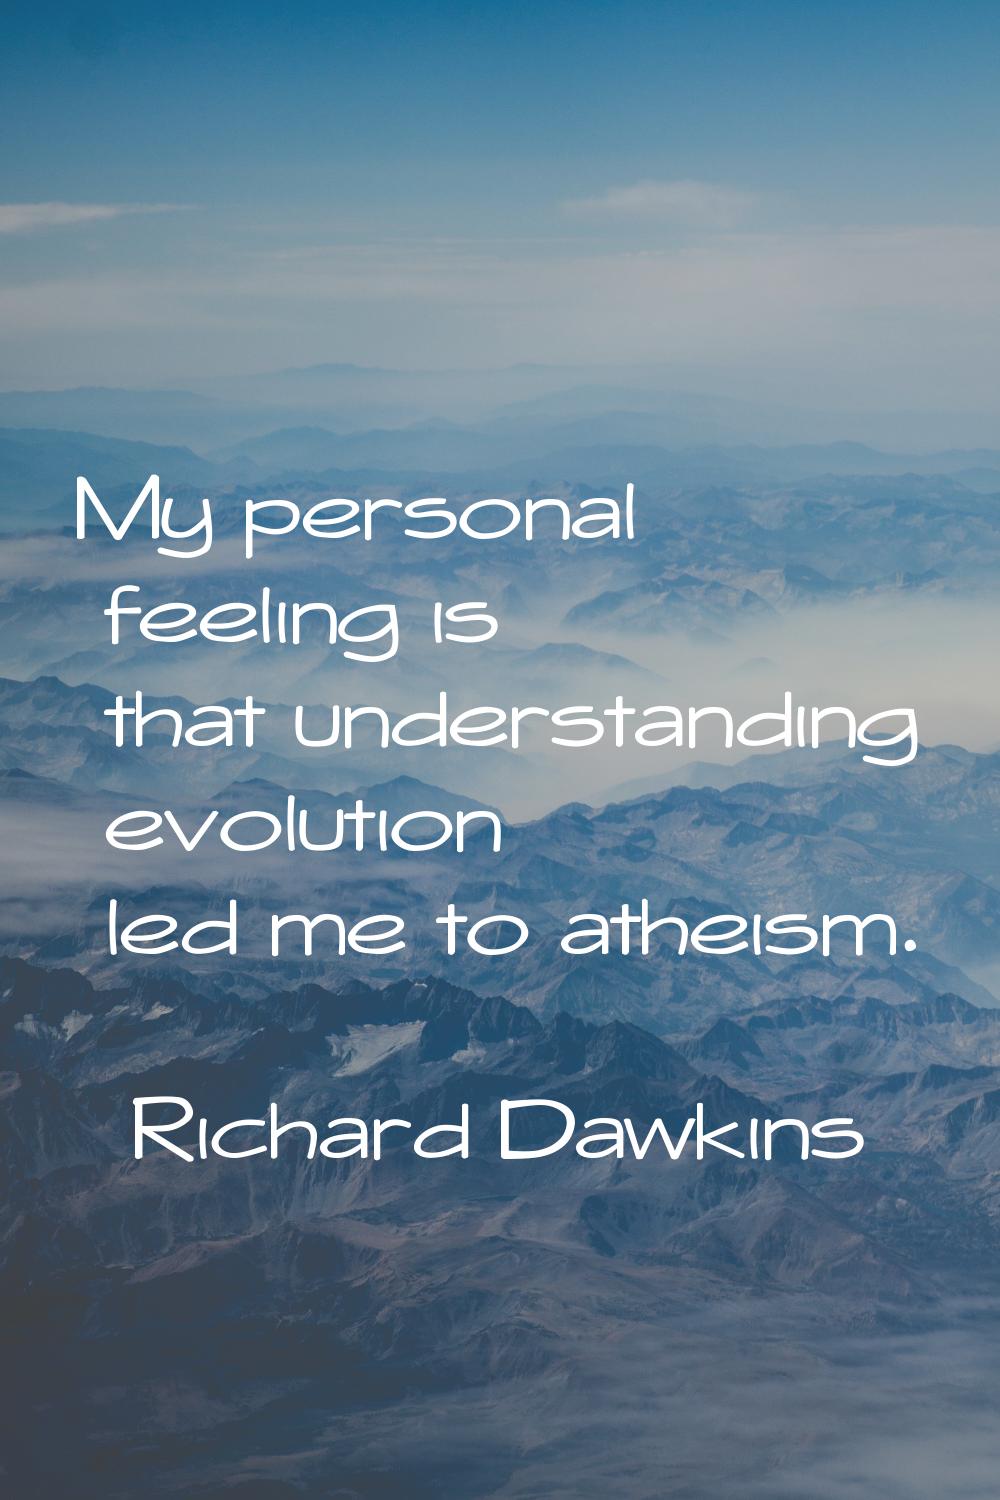 My personal feeling is that understanding evolution led me to atheism.